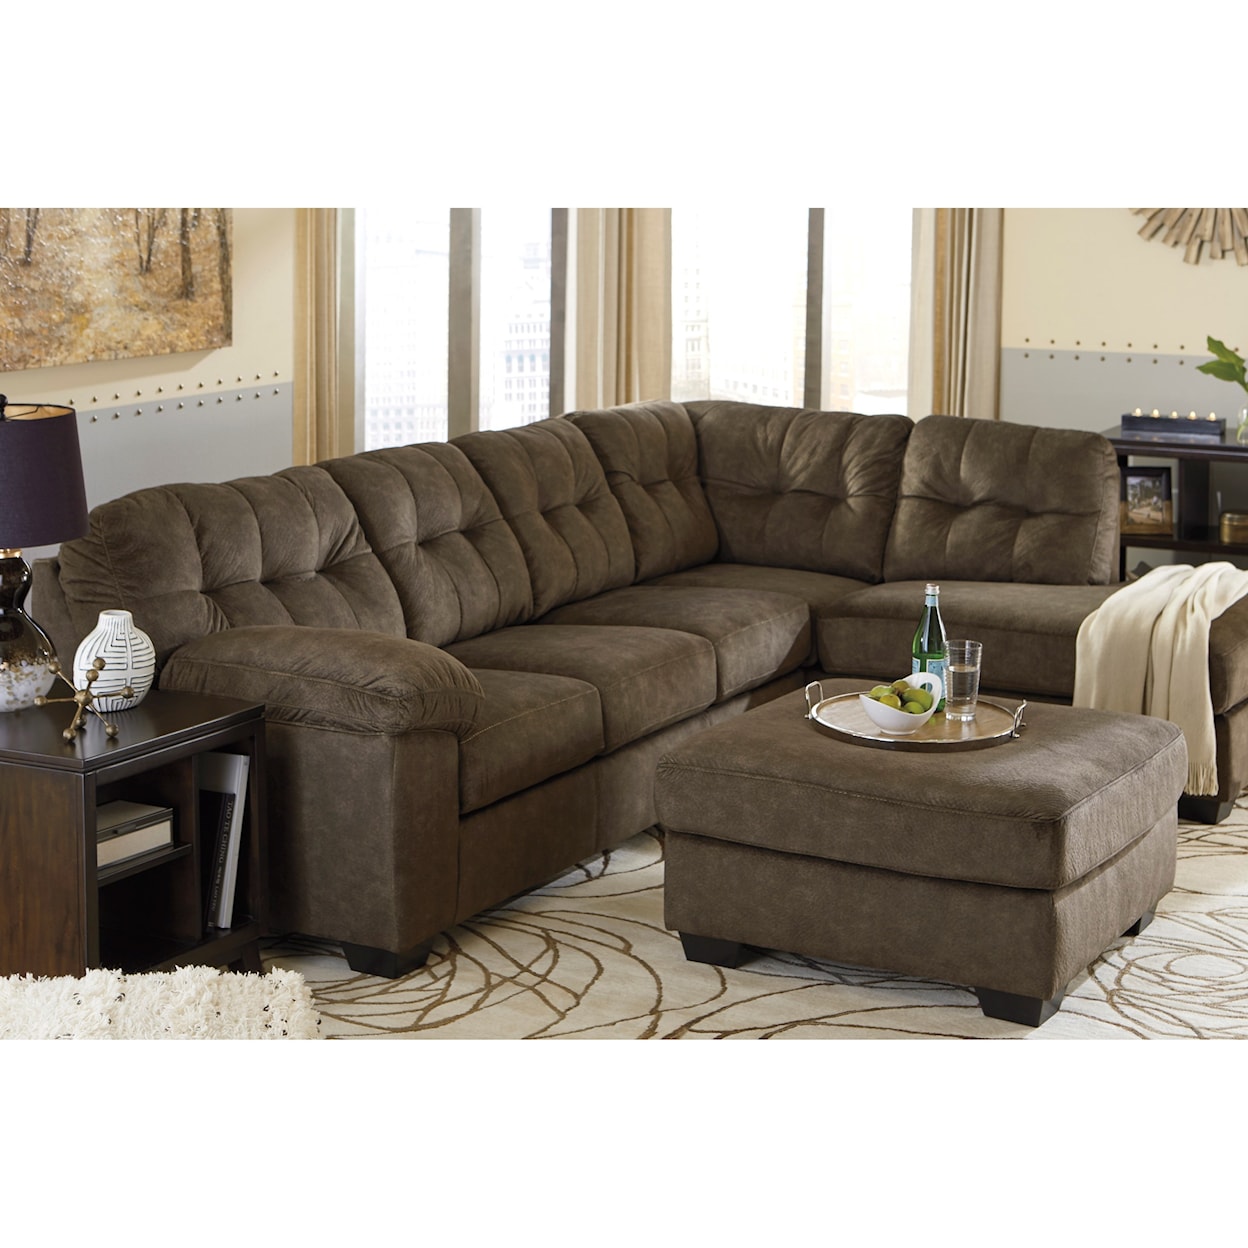 StyleLine Accrington Sectional with Right Chaise